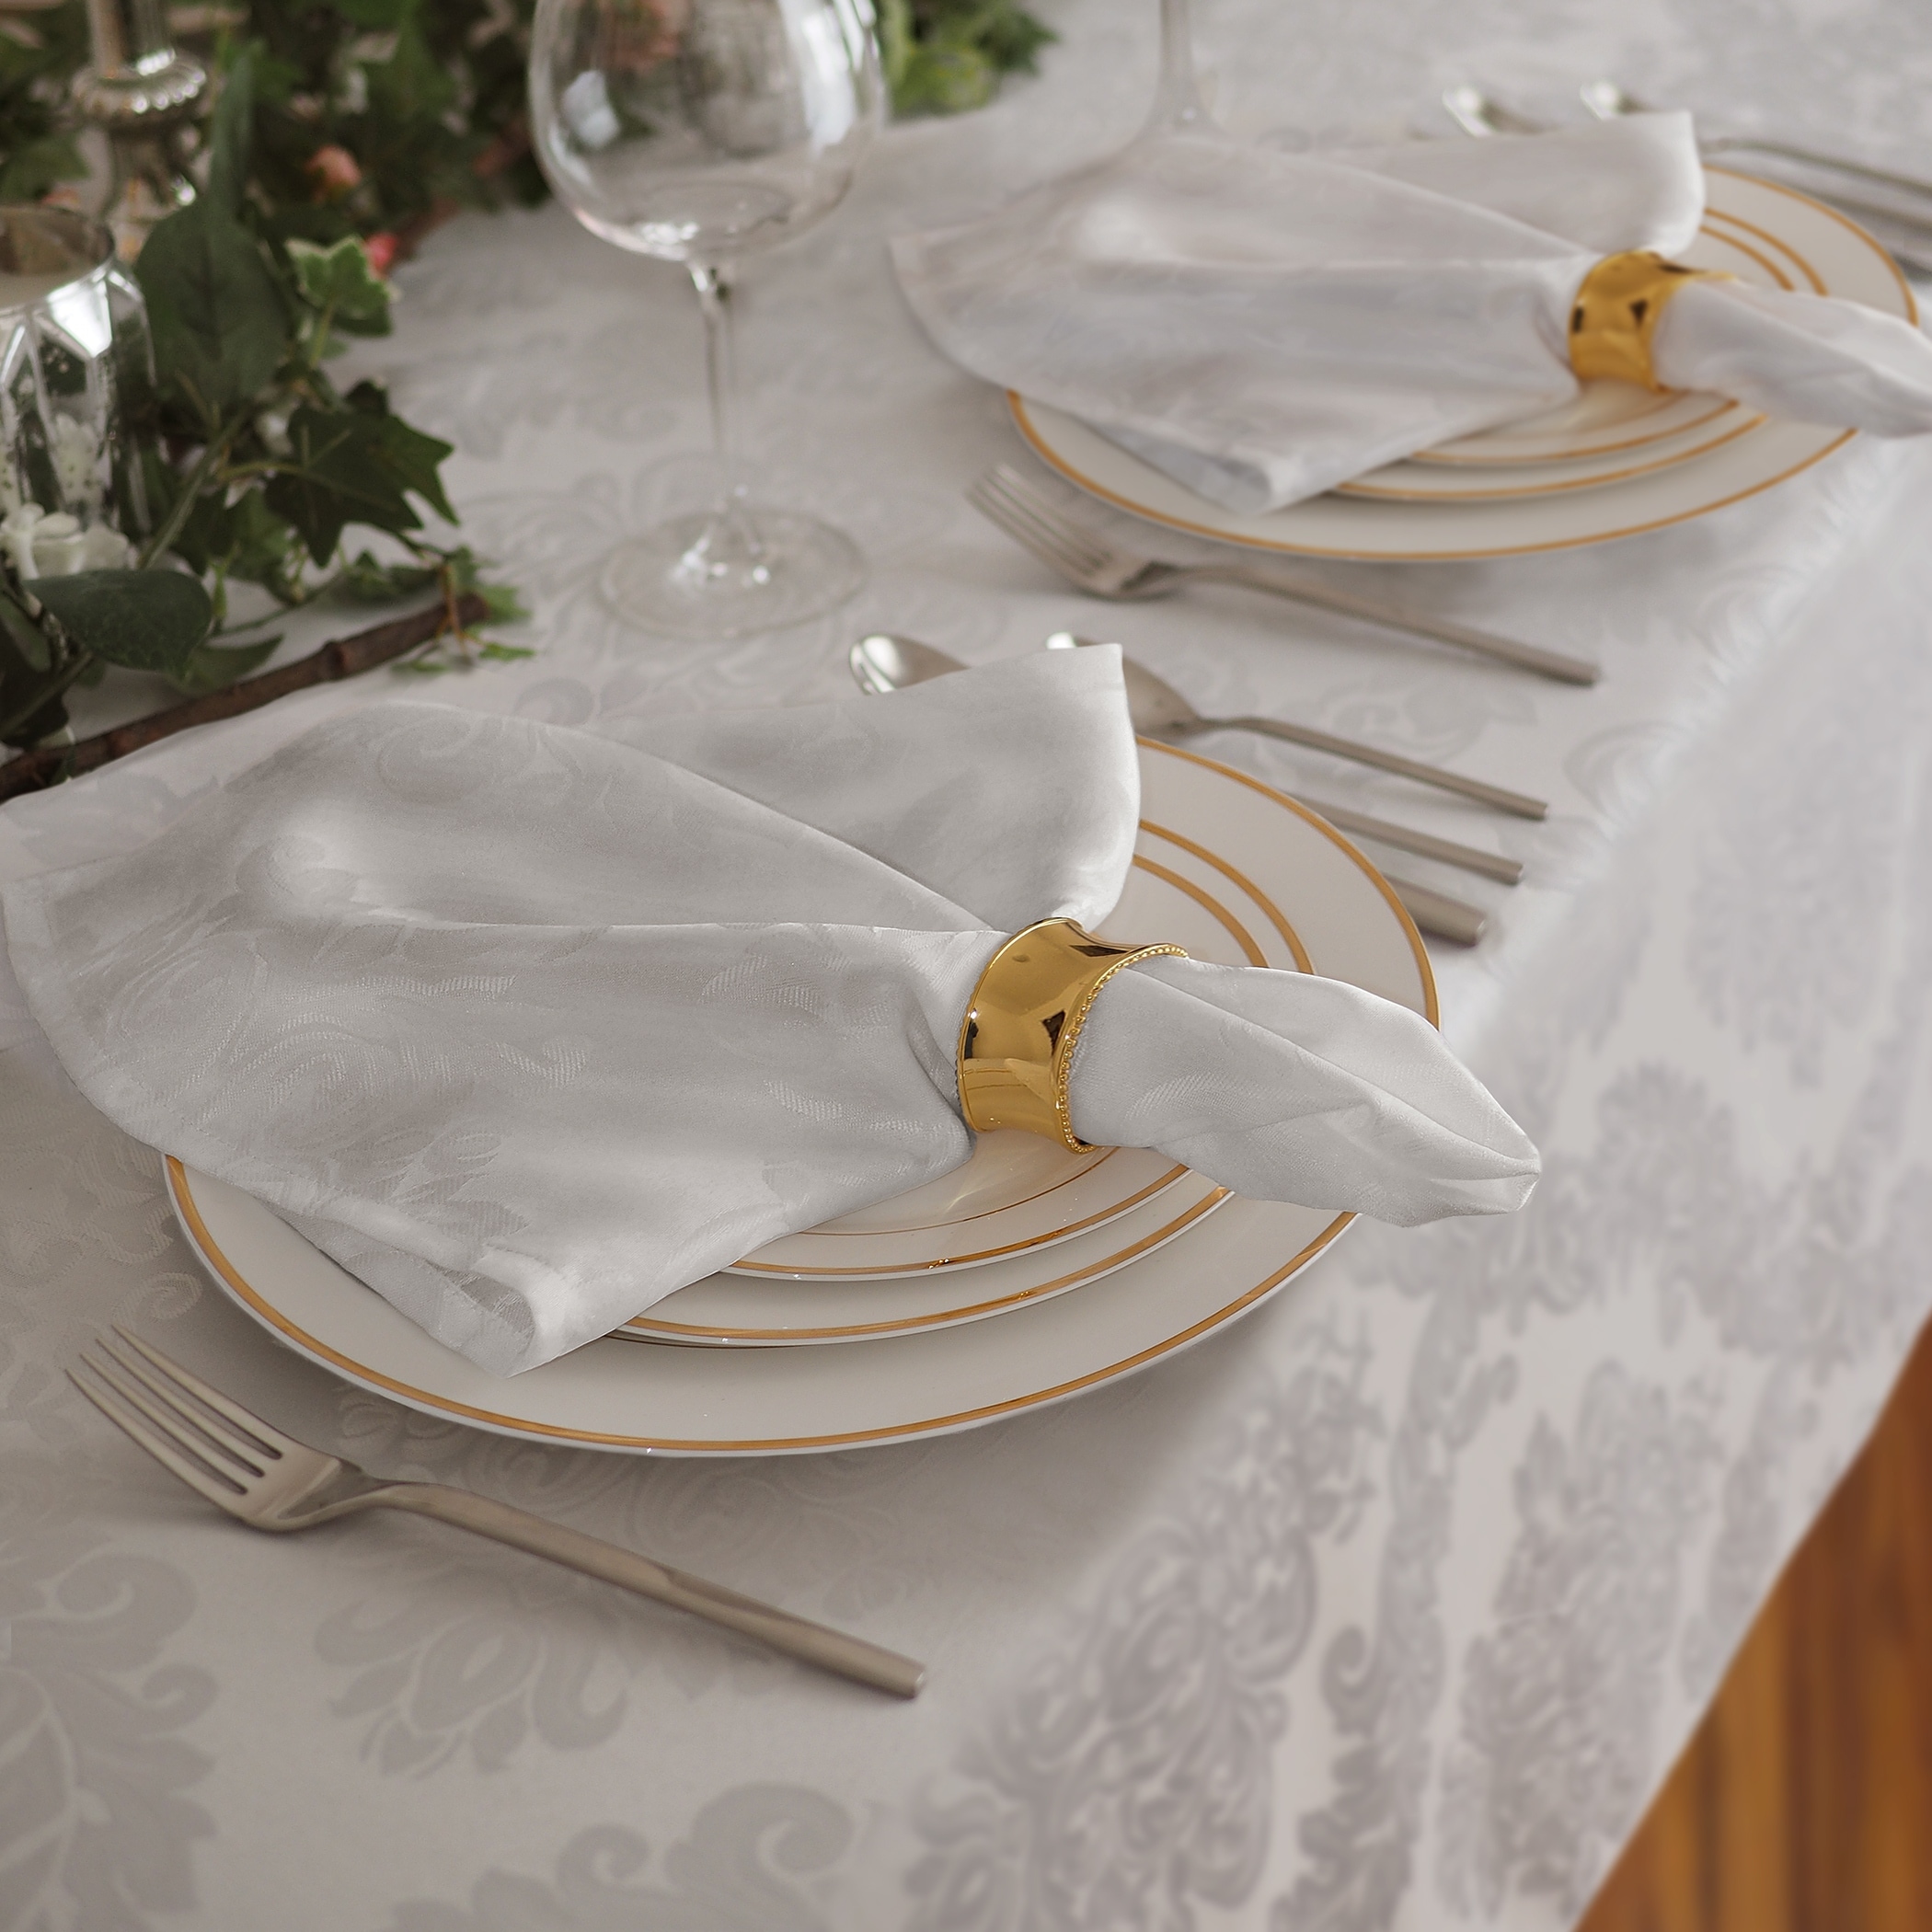 6 Mix 8 Or 12 Ready To Ship Match Velvet Napkins Beautiful Autumn & Thanksgiving Napkins 4 Quality Made in the U.S.A.